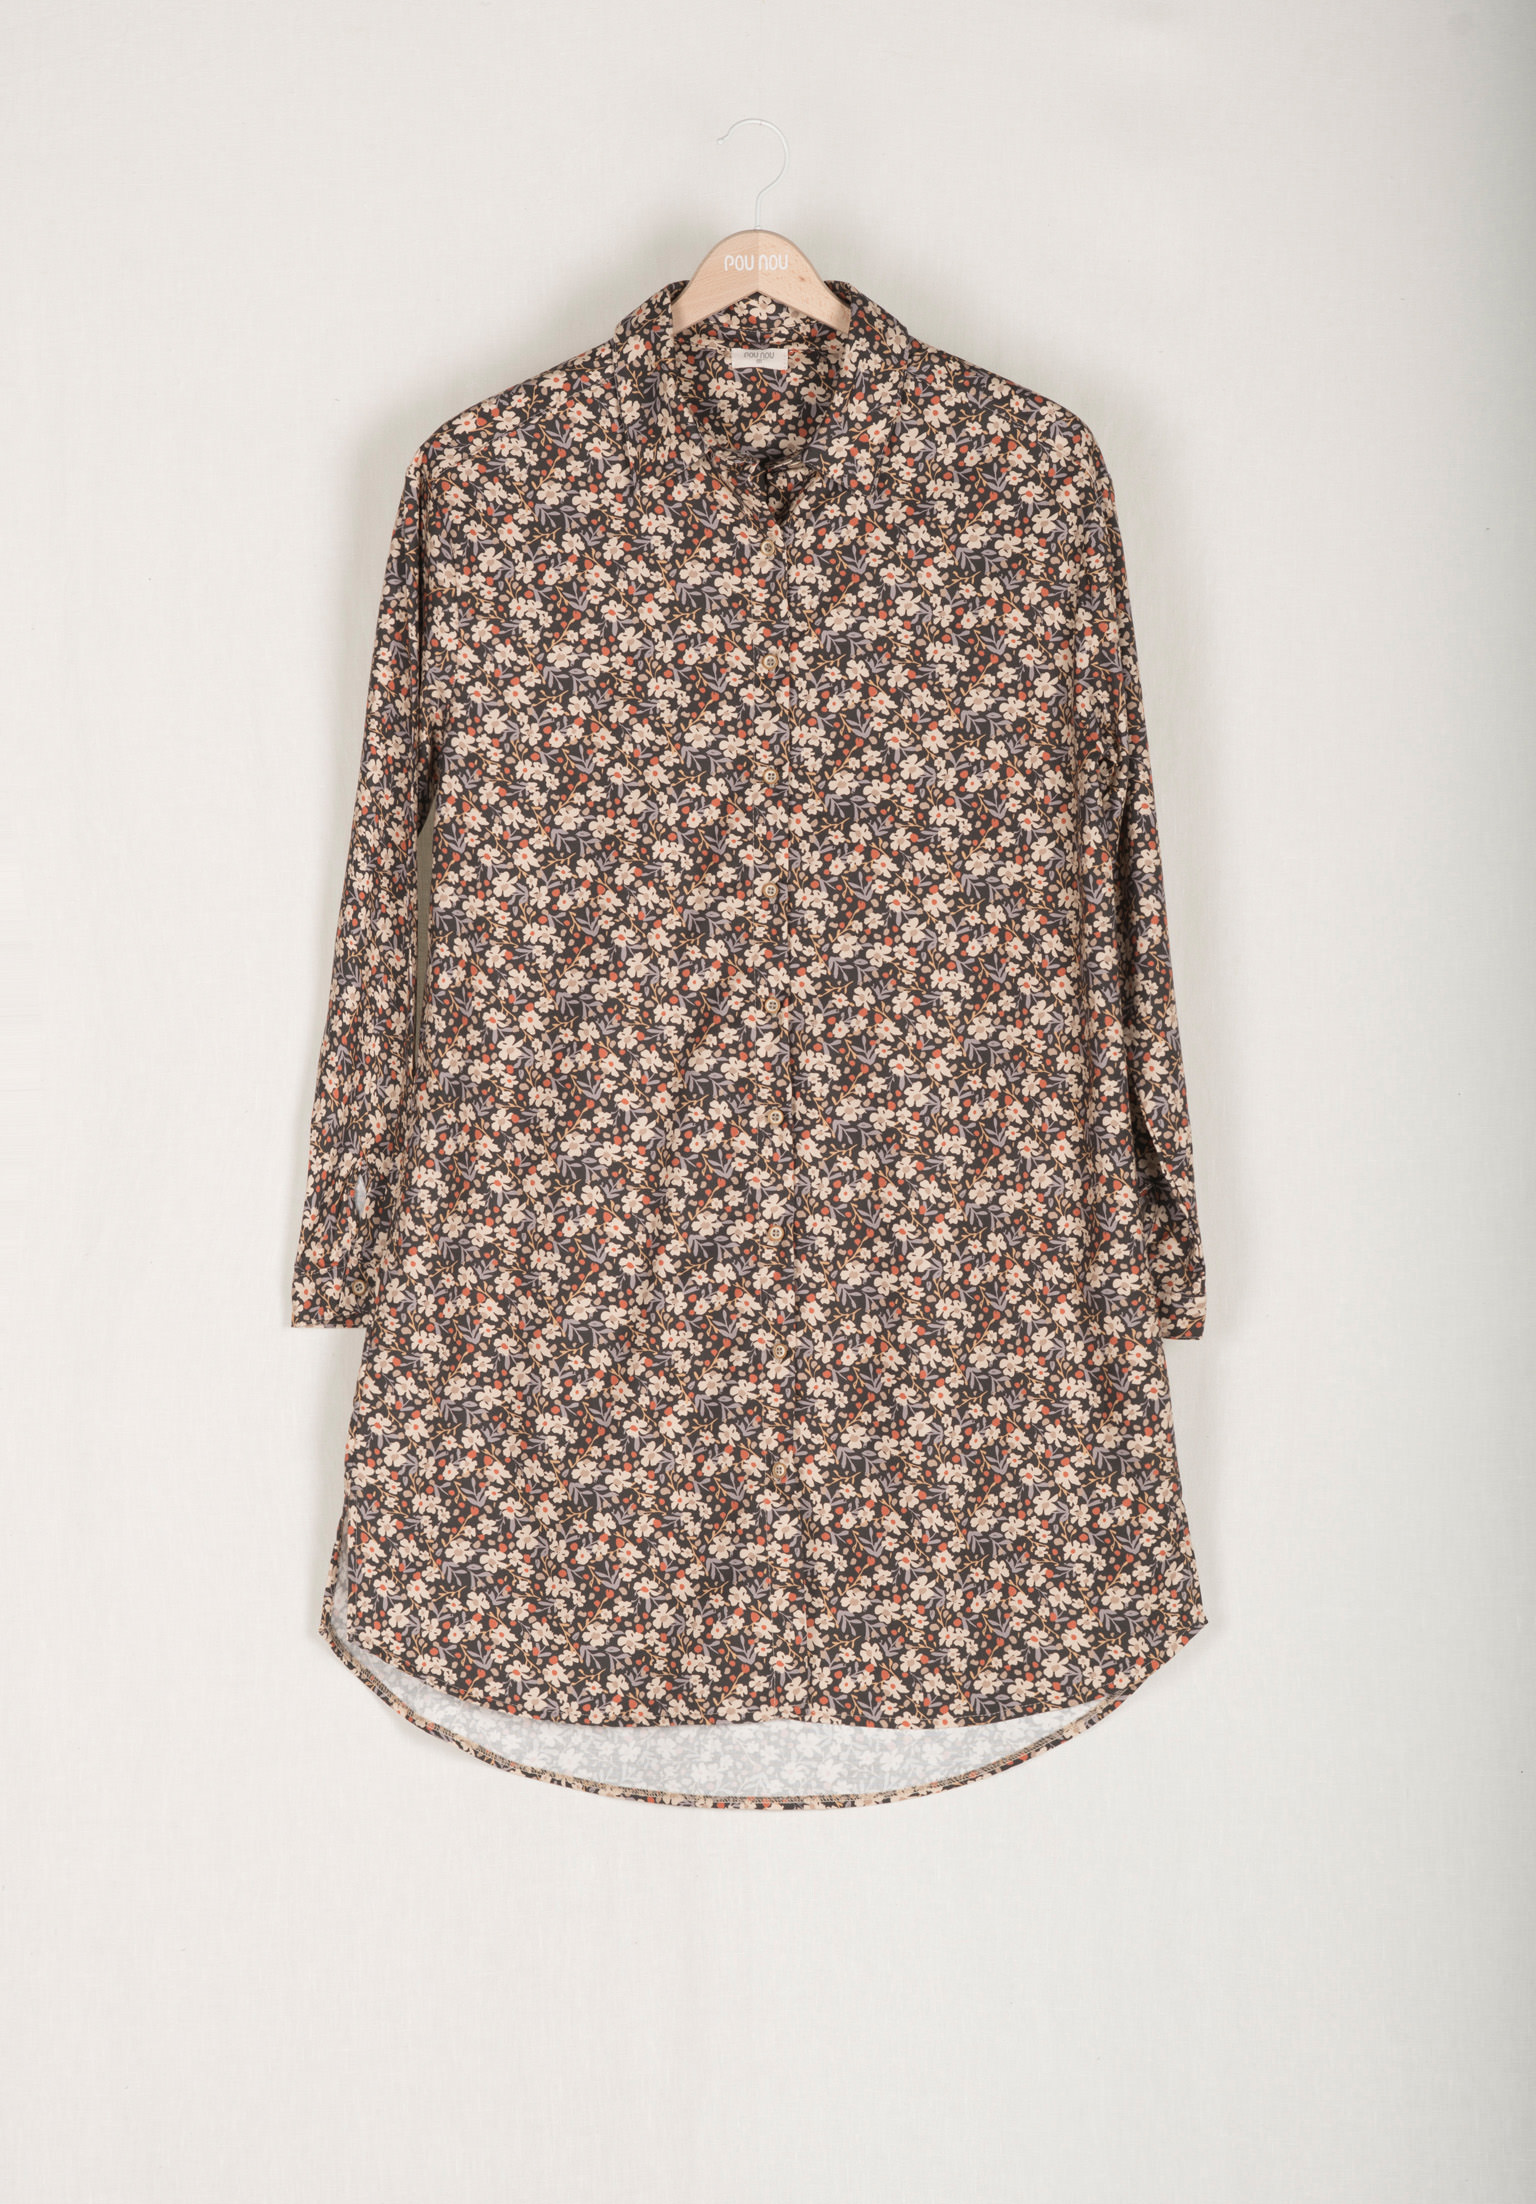 Long shirt with floral print